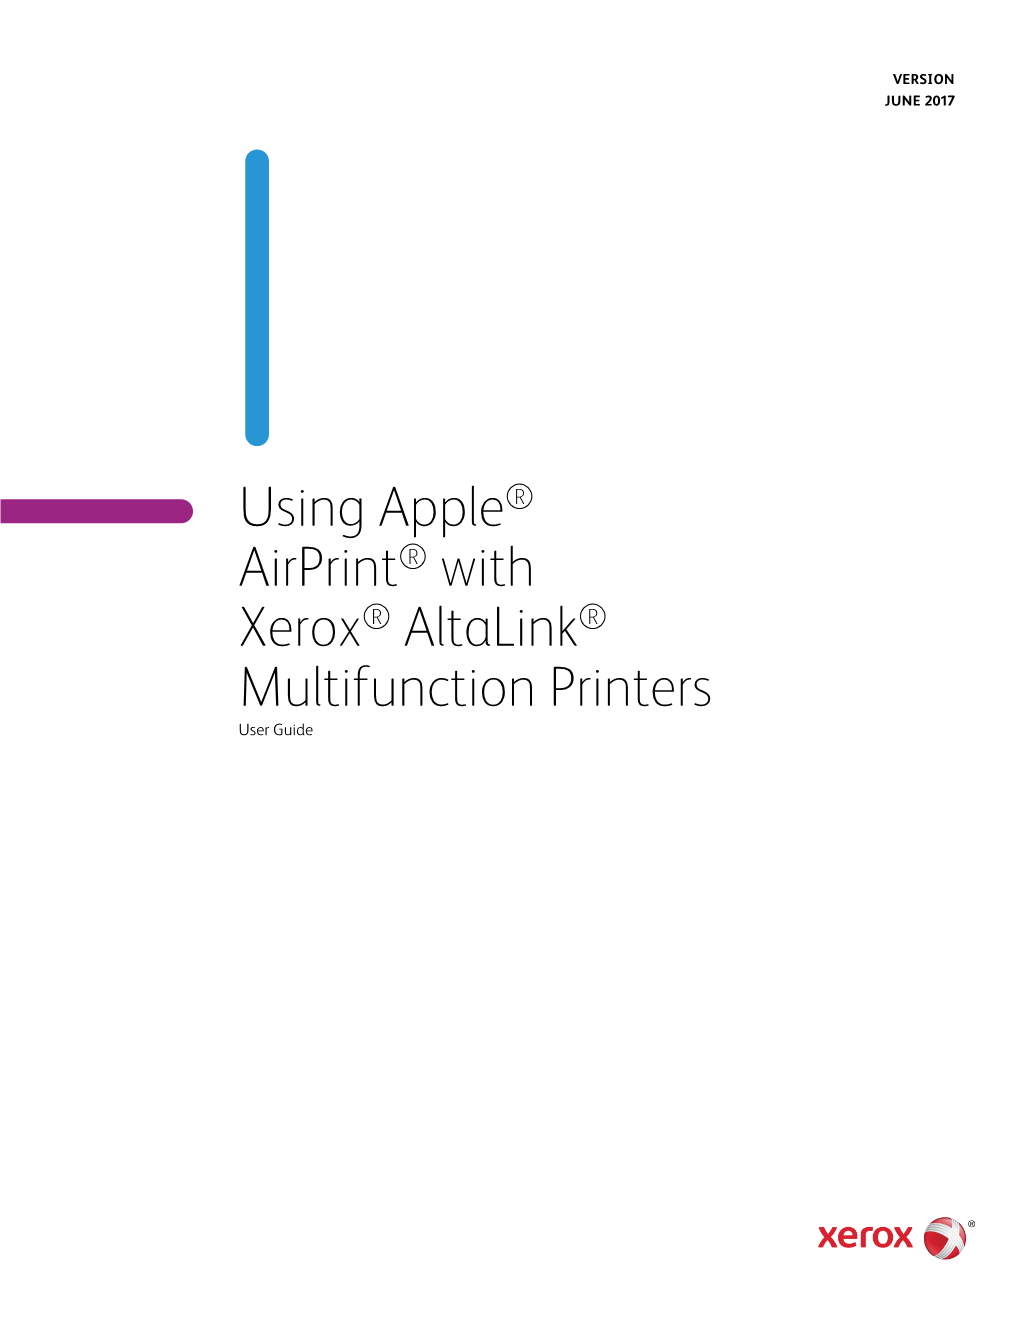 Apple® Airprint® with Xerox® Altalink® Multifunction Printers I Enhanced Security